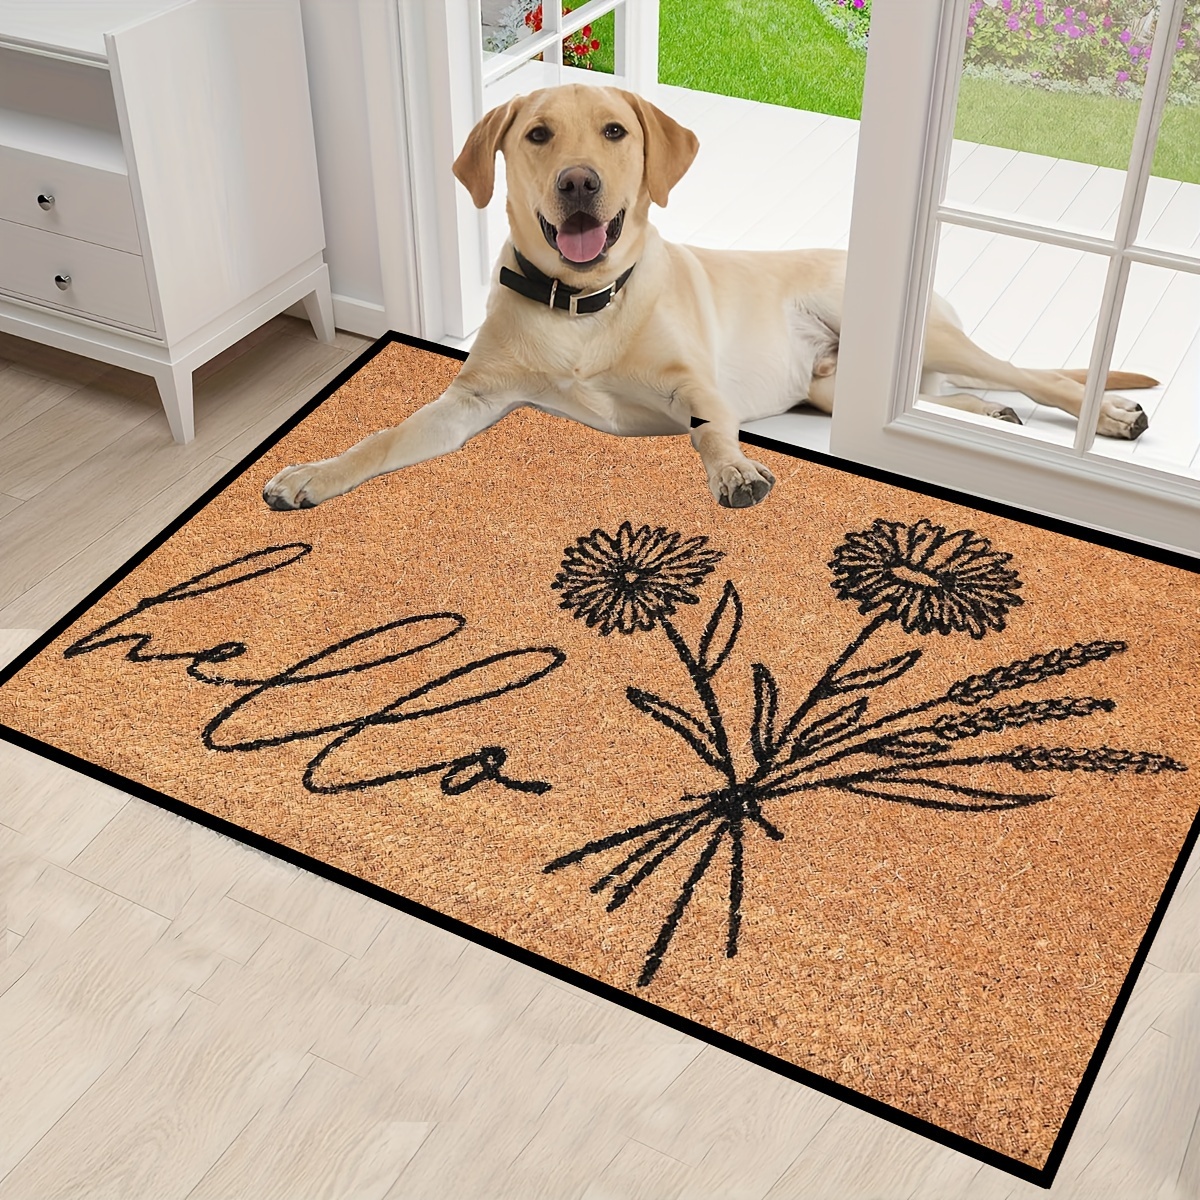 

Polyester Dog & Cat Welcome Doormat - Hello Floral Design, Machine Washable, Non-slip, Stain Resistant Rectangle Entrance Rug For Home – Durable, Soft Crystal Velvet Floor Mat For All Seasons